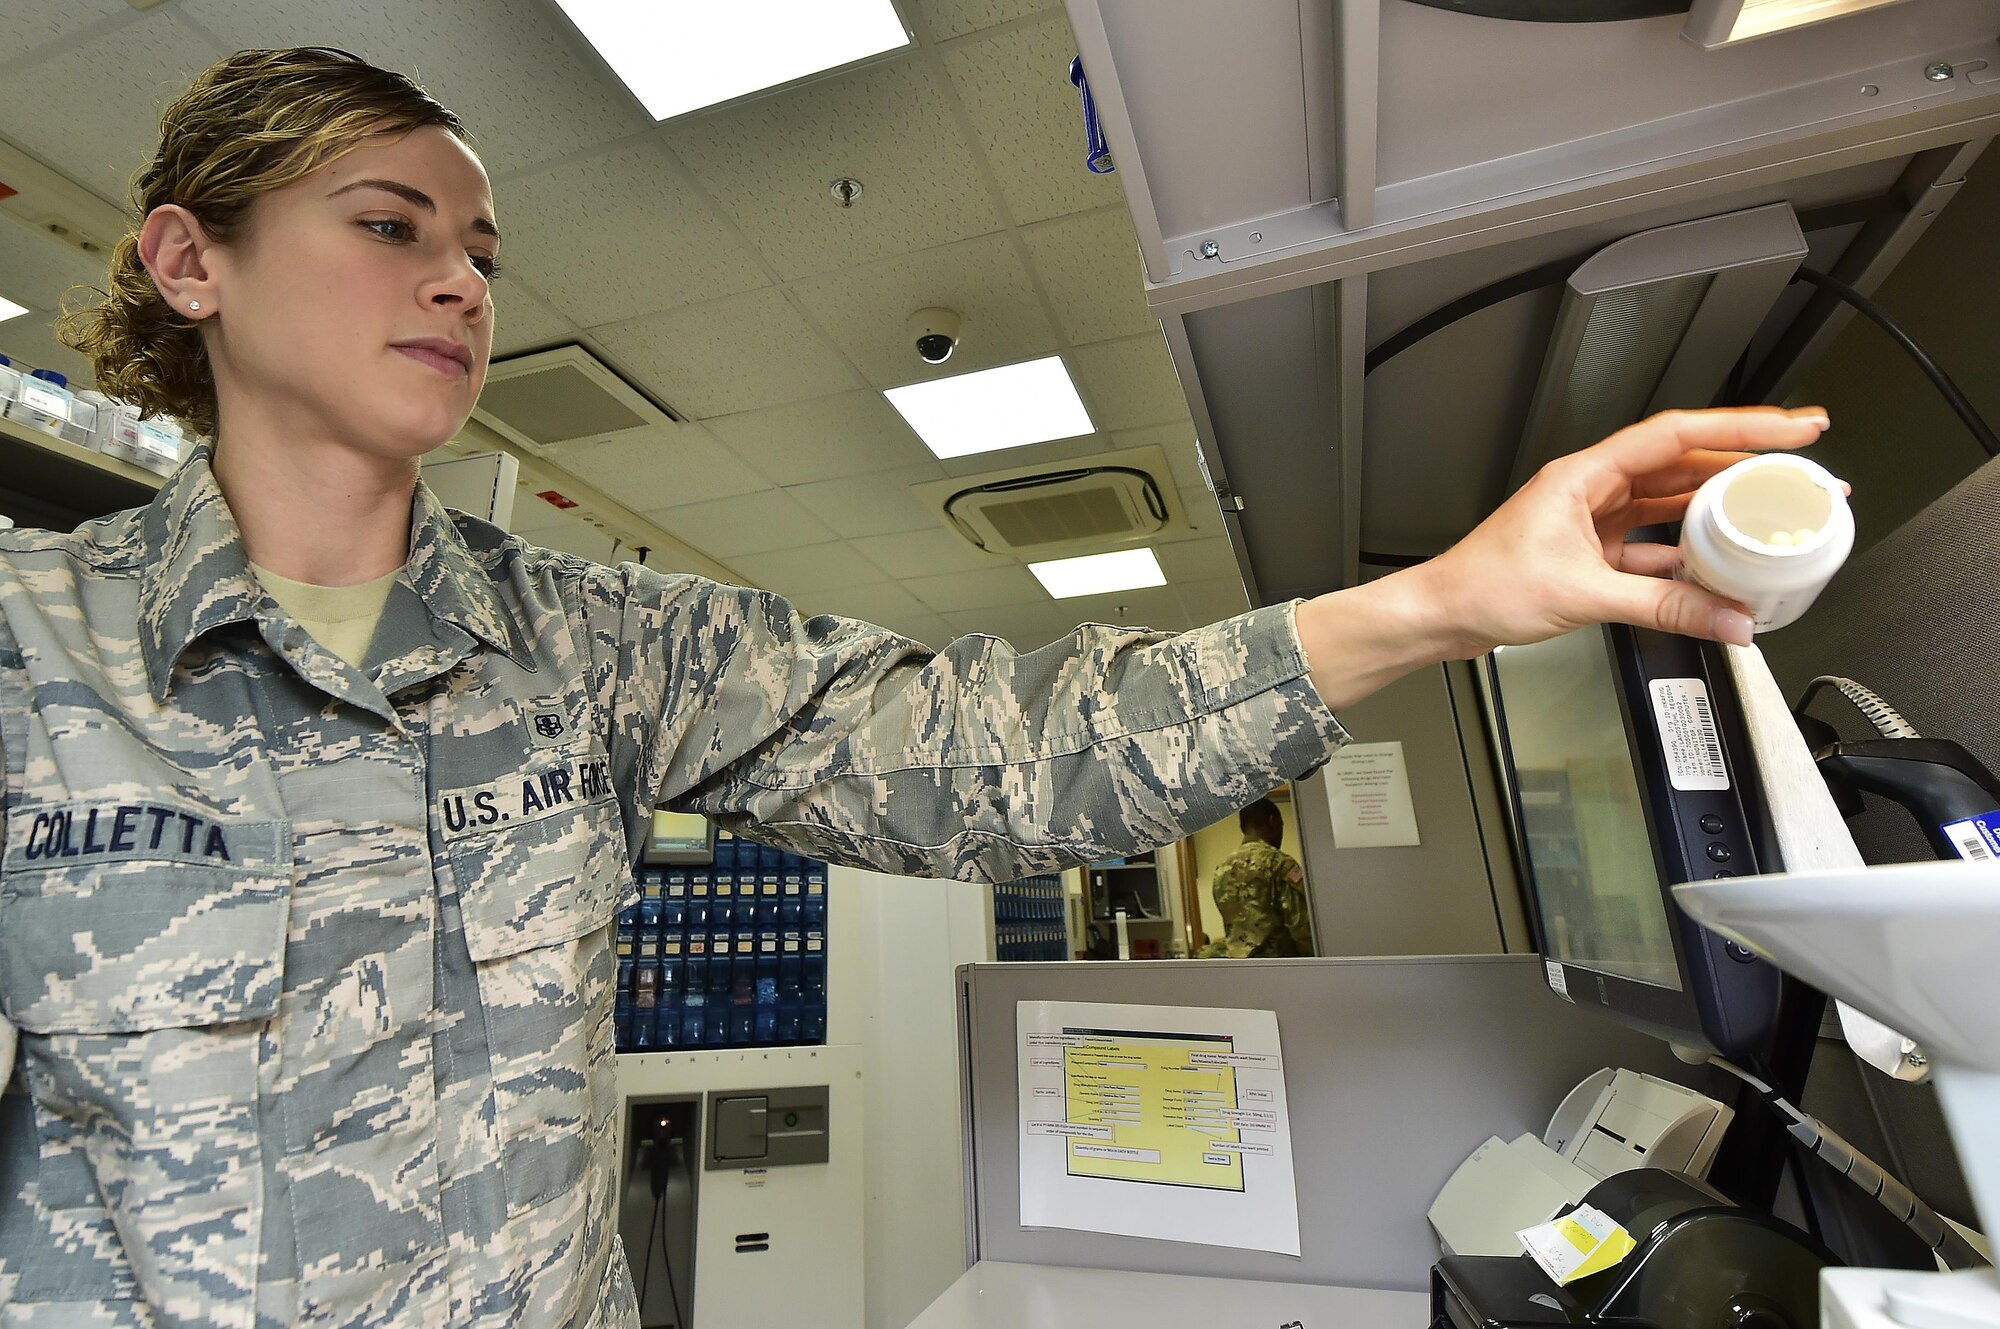 U.S. Air Force Senior Airman Lesley Colletta, 86th Medical Squadron pharmacy technician, pours medicine into a pill counter at Landstuhl Regional Medical Center, Germany, July 13, 2017. Colletta’s efforts as a pharmacy technician saved the life of an infant earlier this year after she recognized a medical error and spoke up about a wrong dosing of the medication. Air Force Medical Service recognized Colletta as a Trusted Care Hero. (U.S. Air Force photo by Staff Sgt. Jonathan Bass)